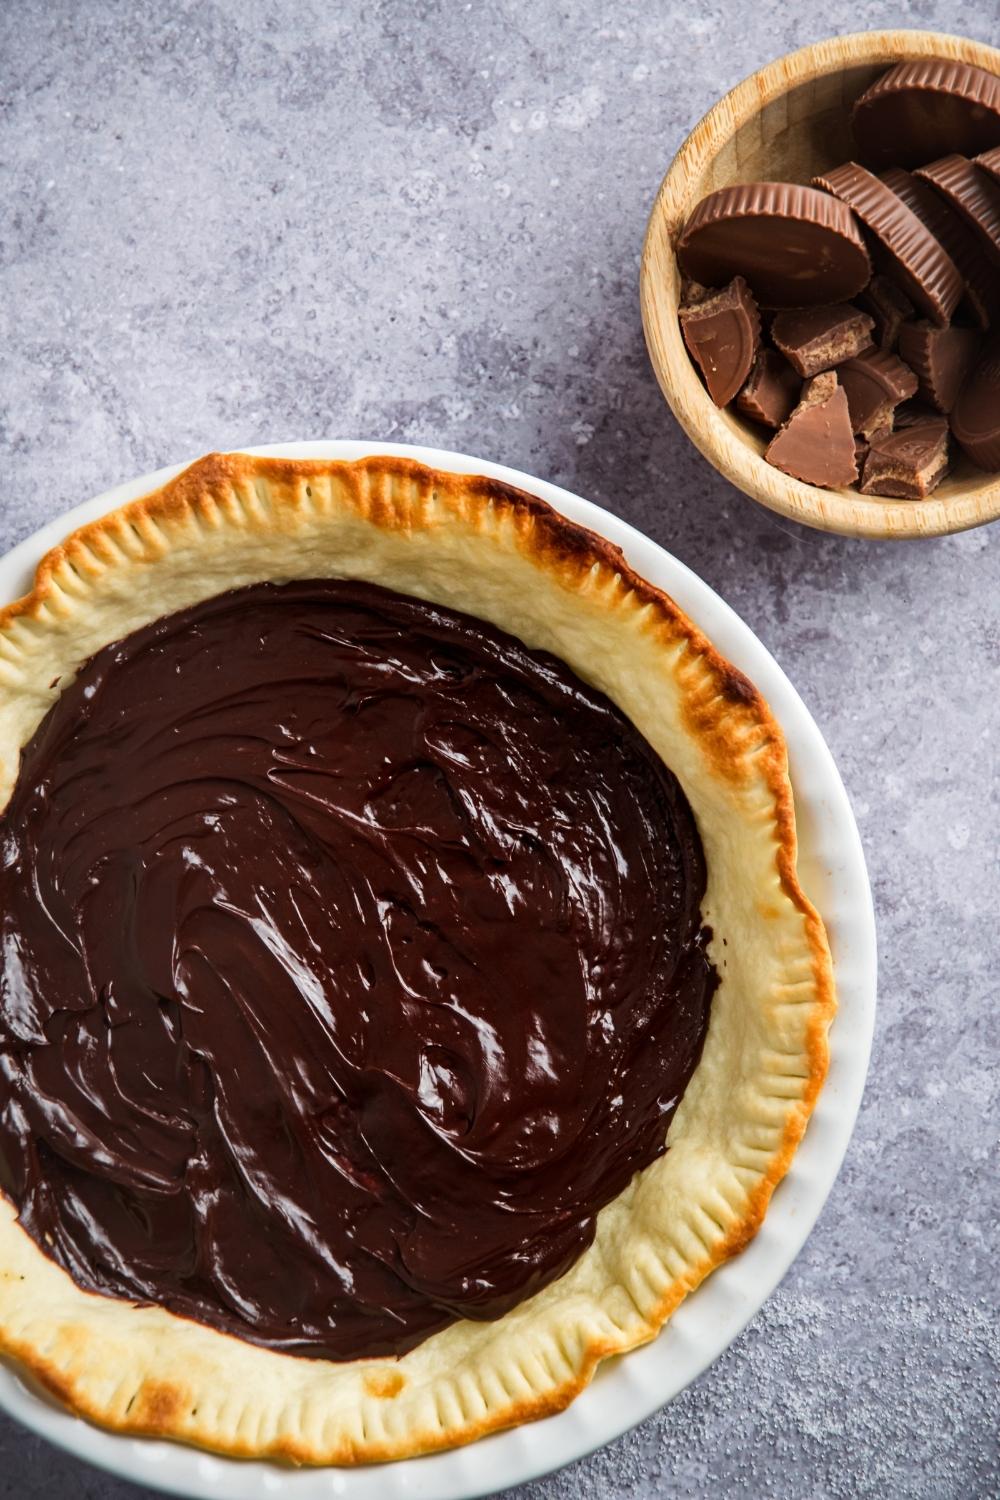 An overview of a baked pie crust topped with chocolate fudge. A small wooden bowl sits next to it with Reese's peanut butter cups.